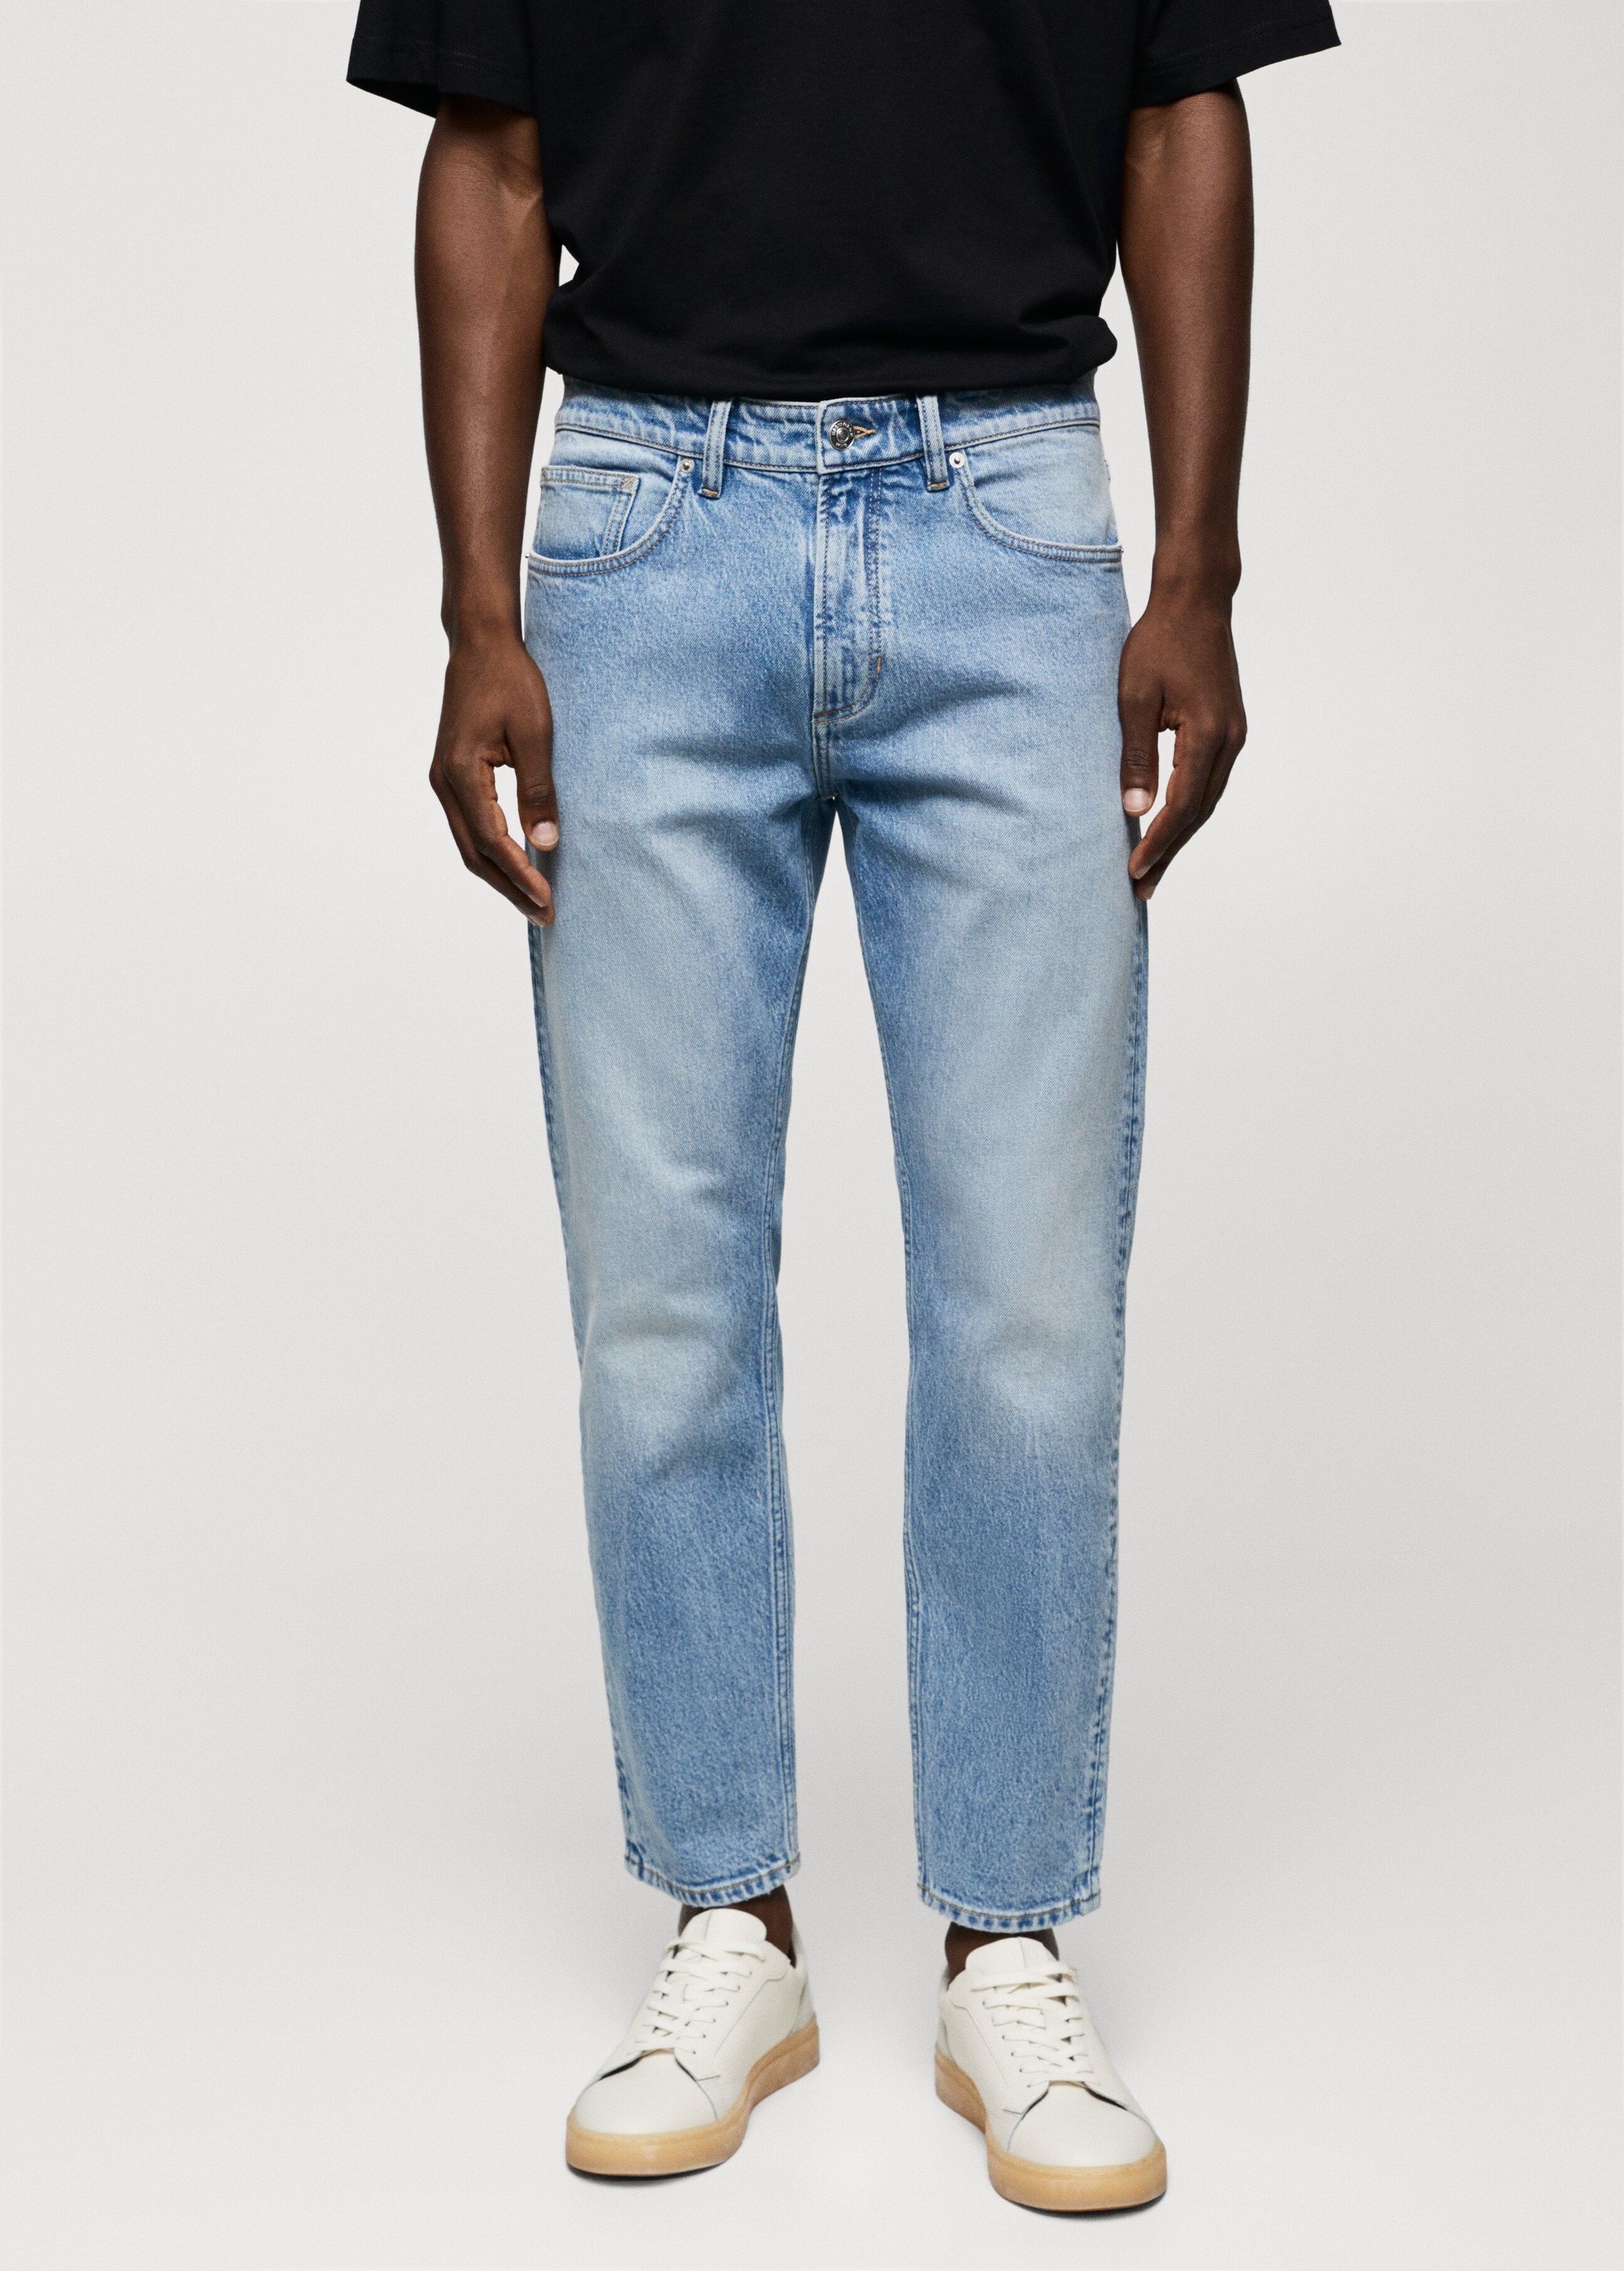 Jeans Ben tapered cropped - Plano medio